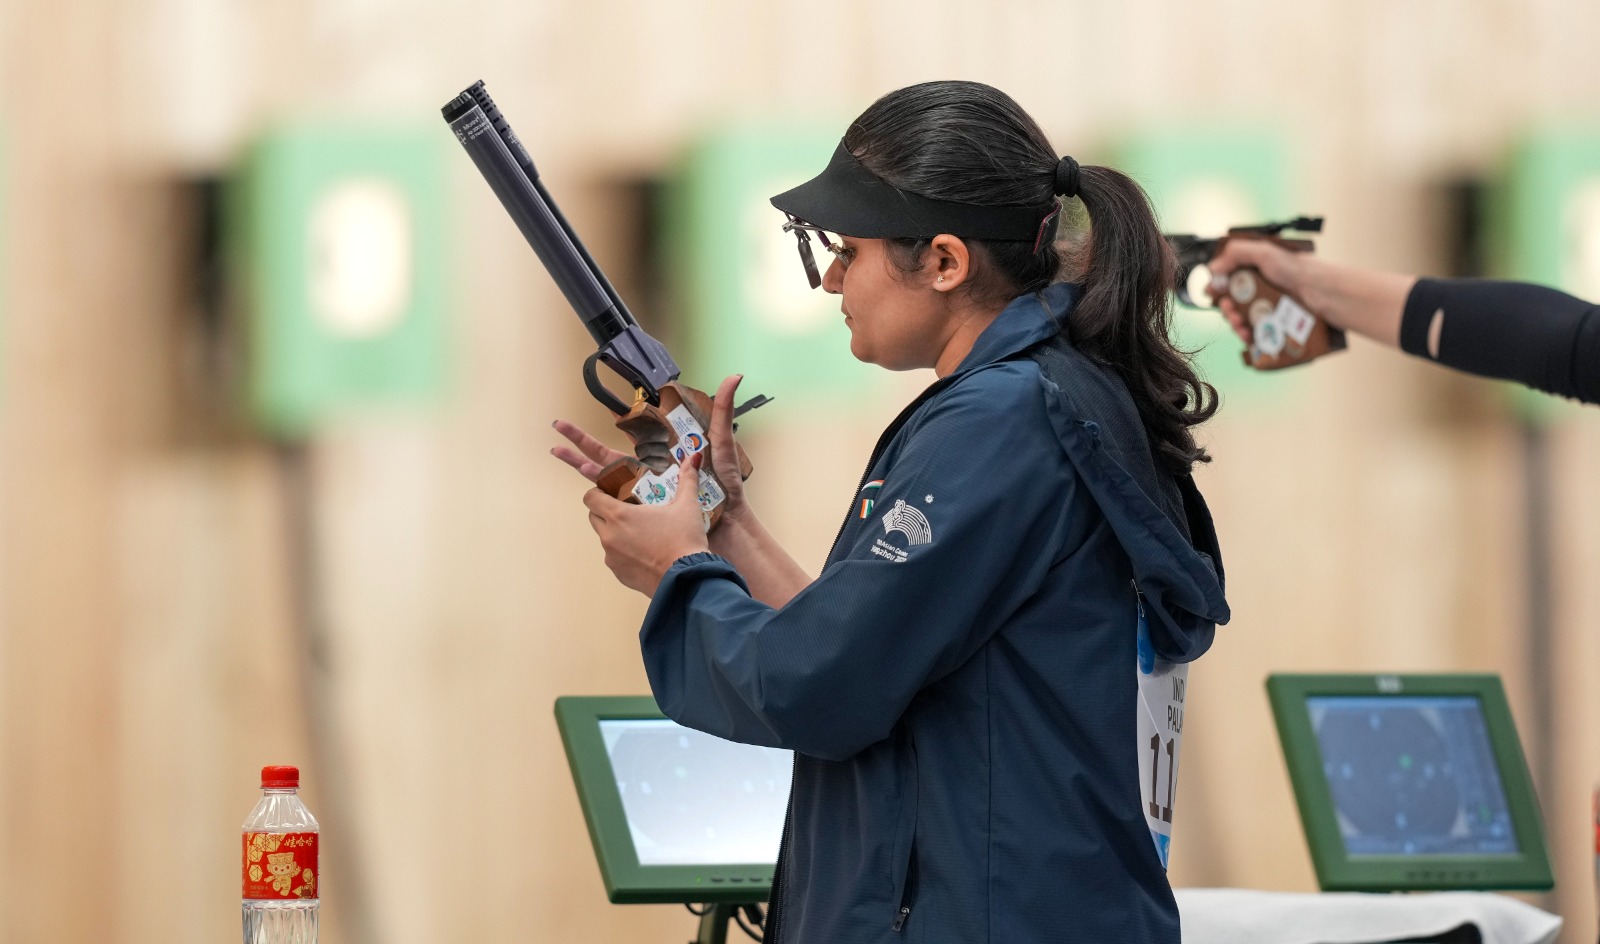 Asian Games: Palak Gets Record-Breaking Gold, Esha Wins Silver In Women’s 10 m Air Pistol Final